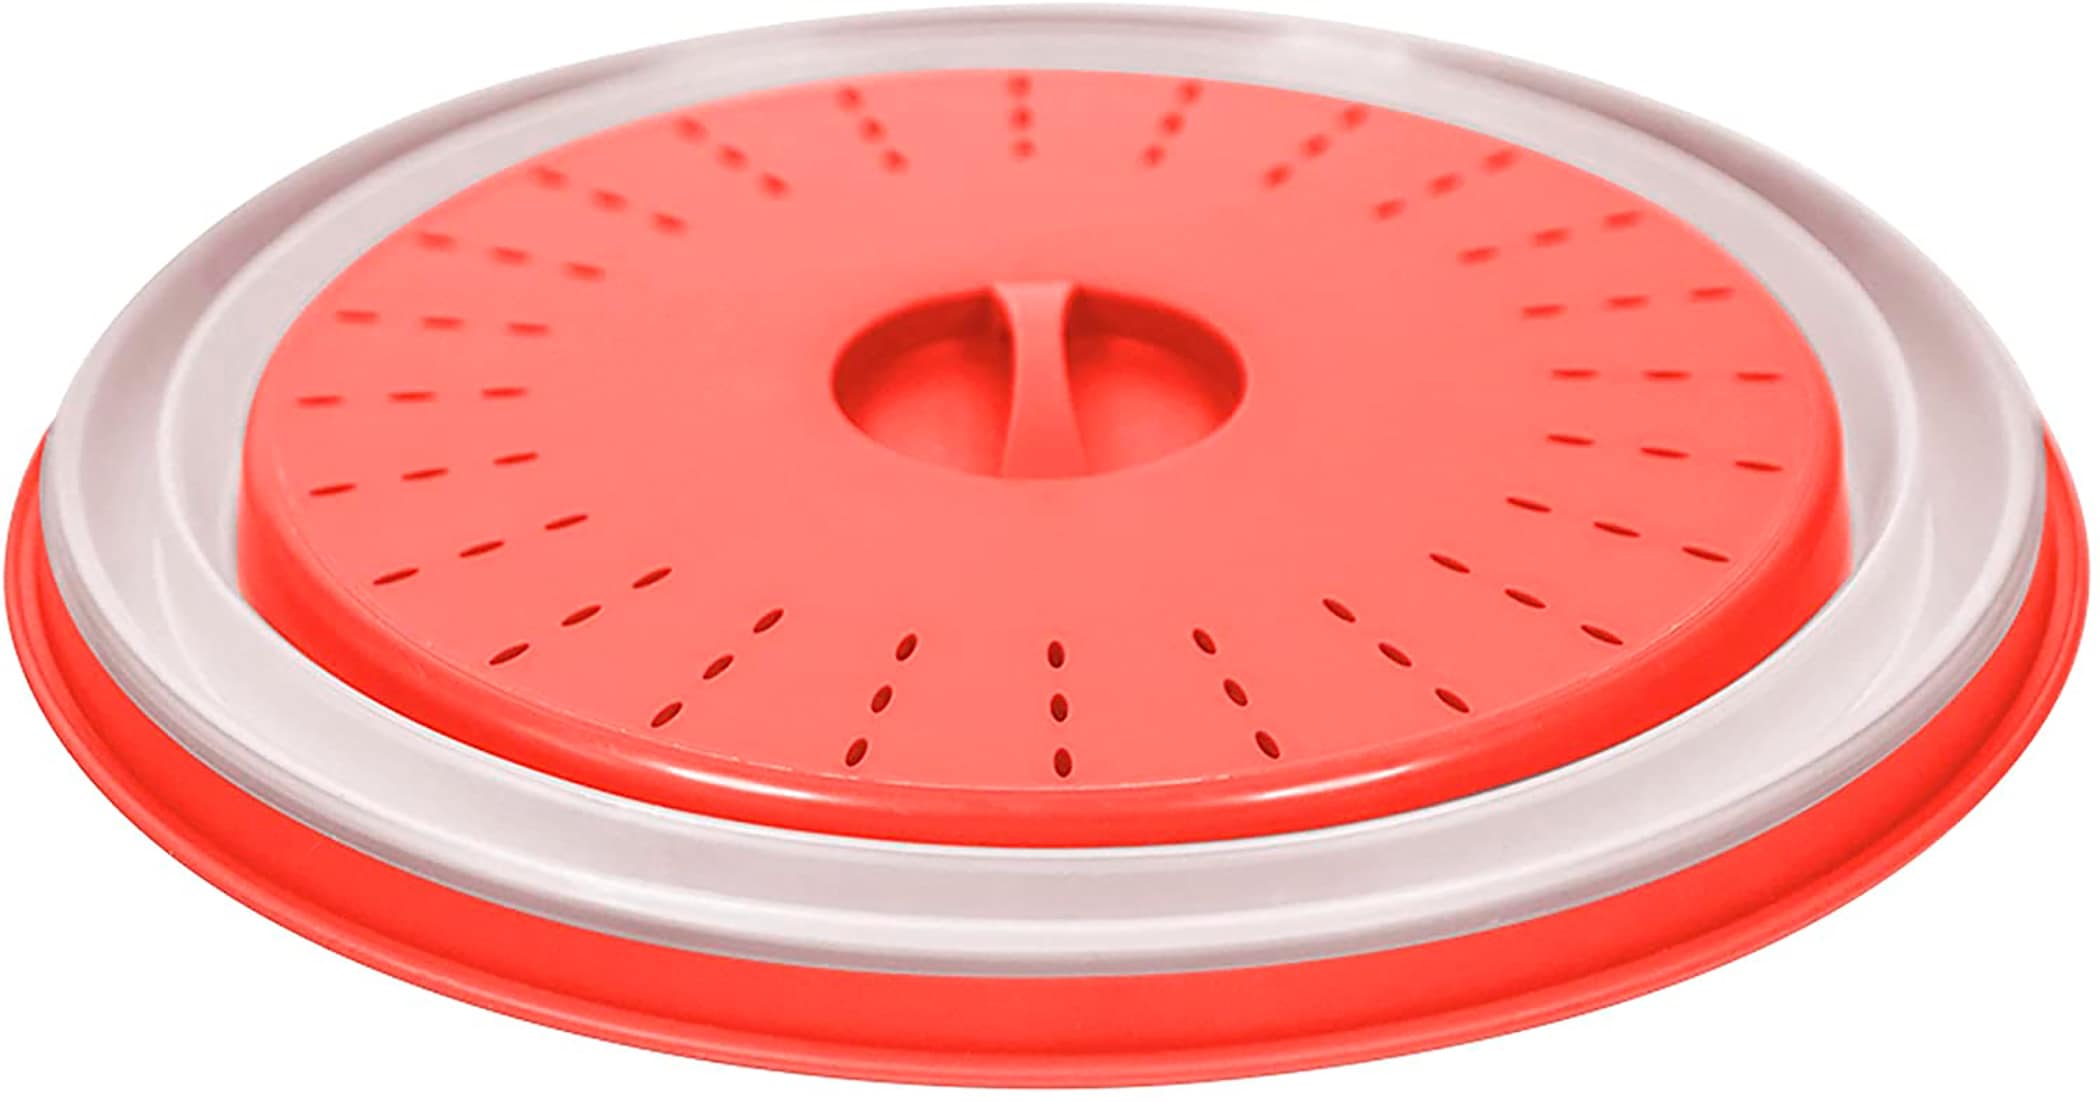 Tovolo microwave cover prevents food splatter